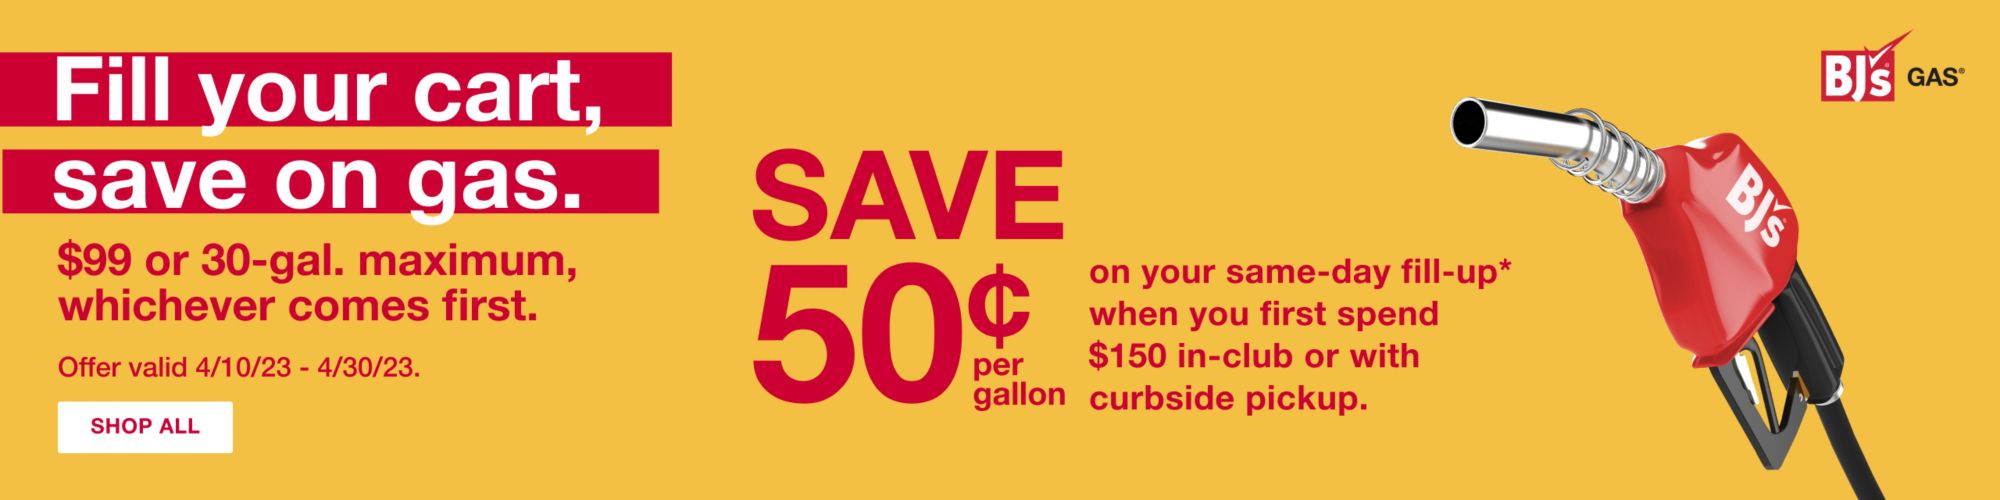 Fill your cart, save on gas. Save 50 cents per gallon on your same-day fill-up* when you first spend $150 in-club or with curbside pickup. View details below